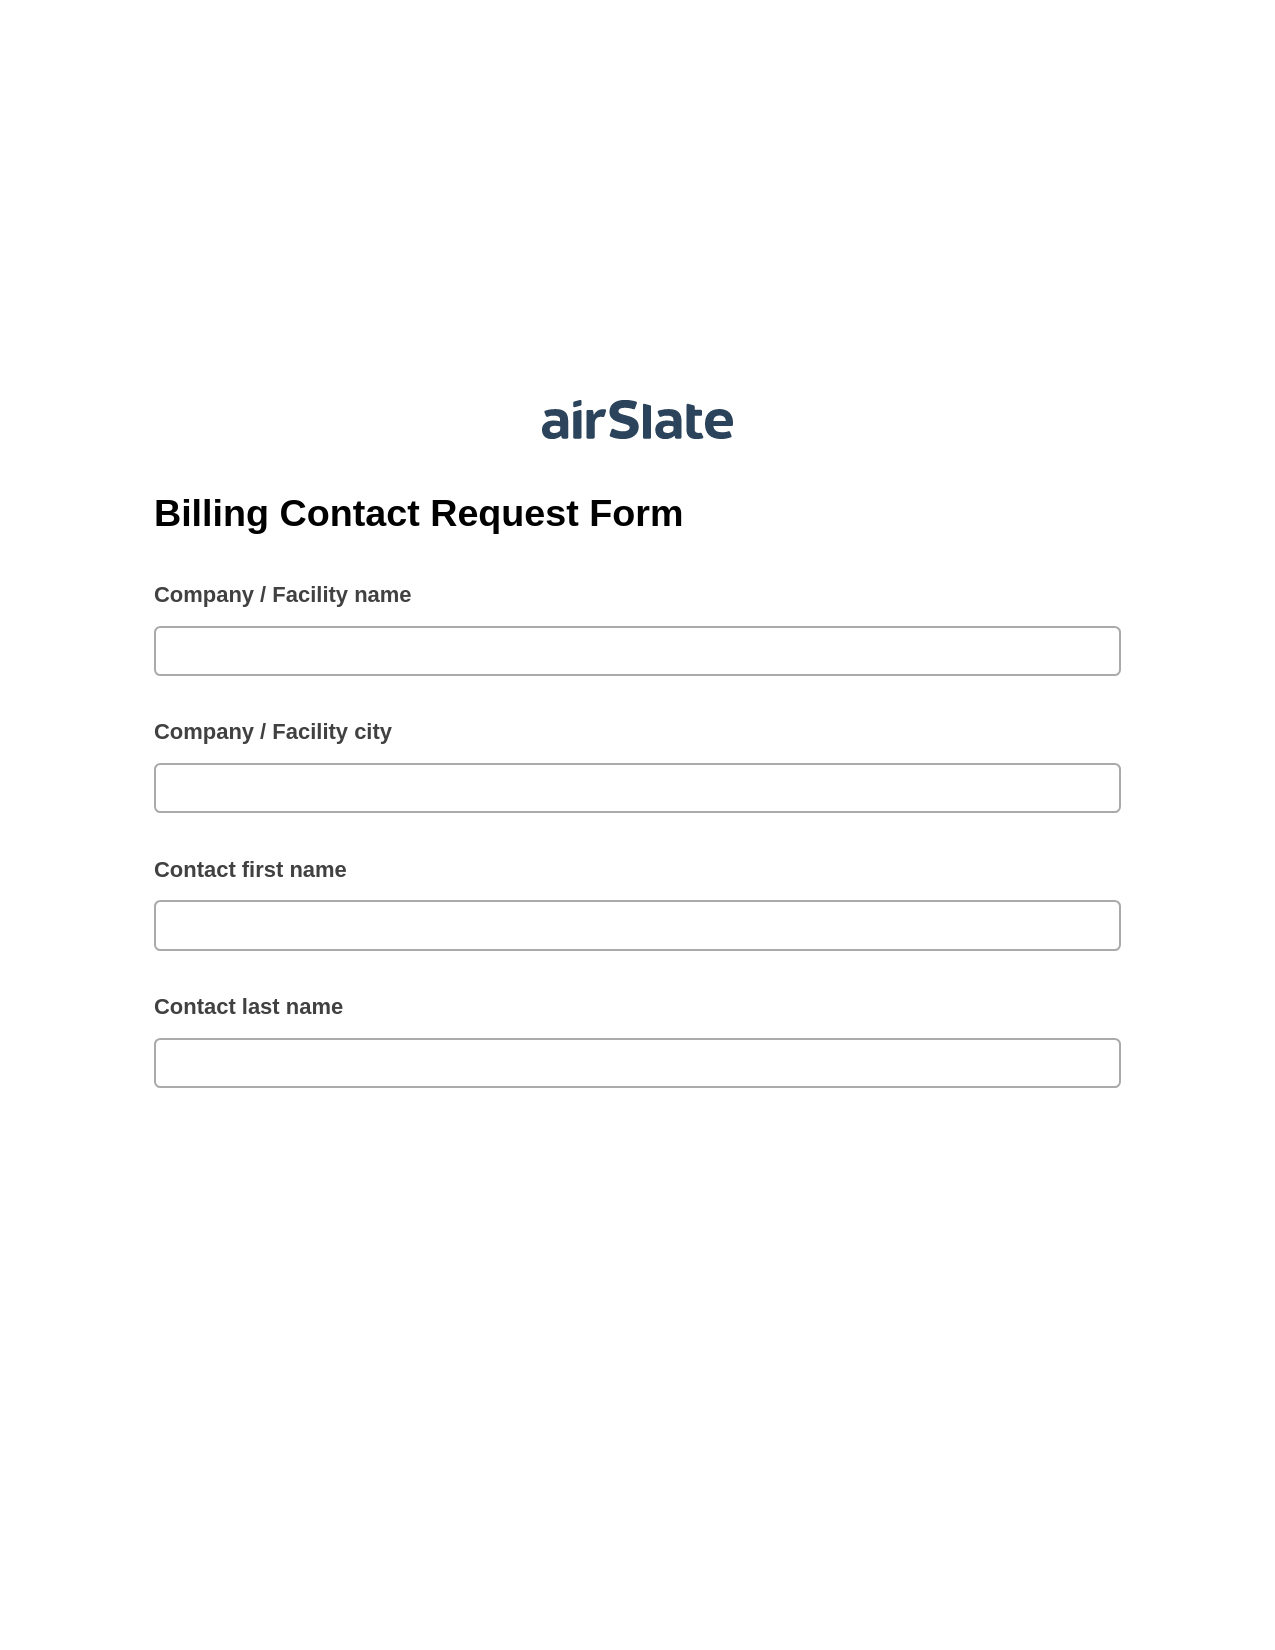 Multirole Billing Contact Request Form Pre-fill from MySQL Bot, Jira Bot, Export to Smartsheet